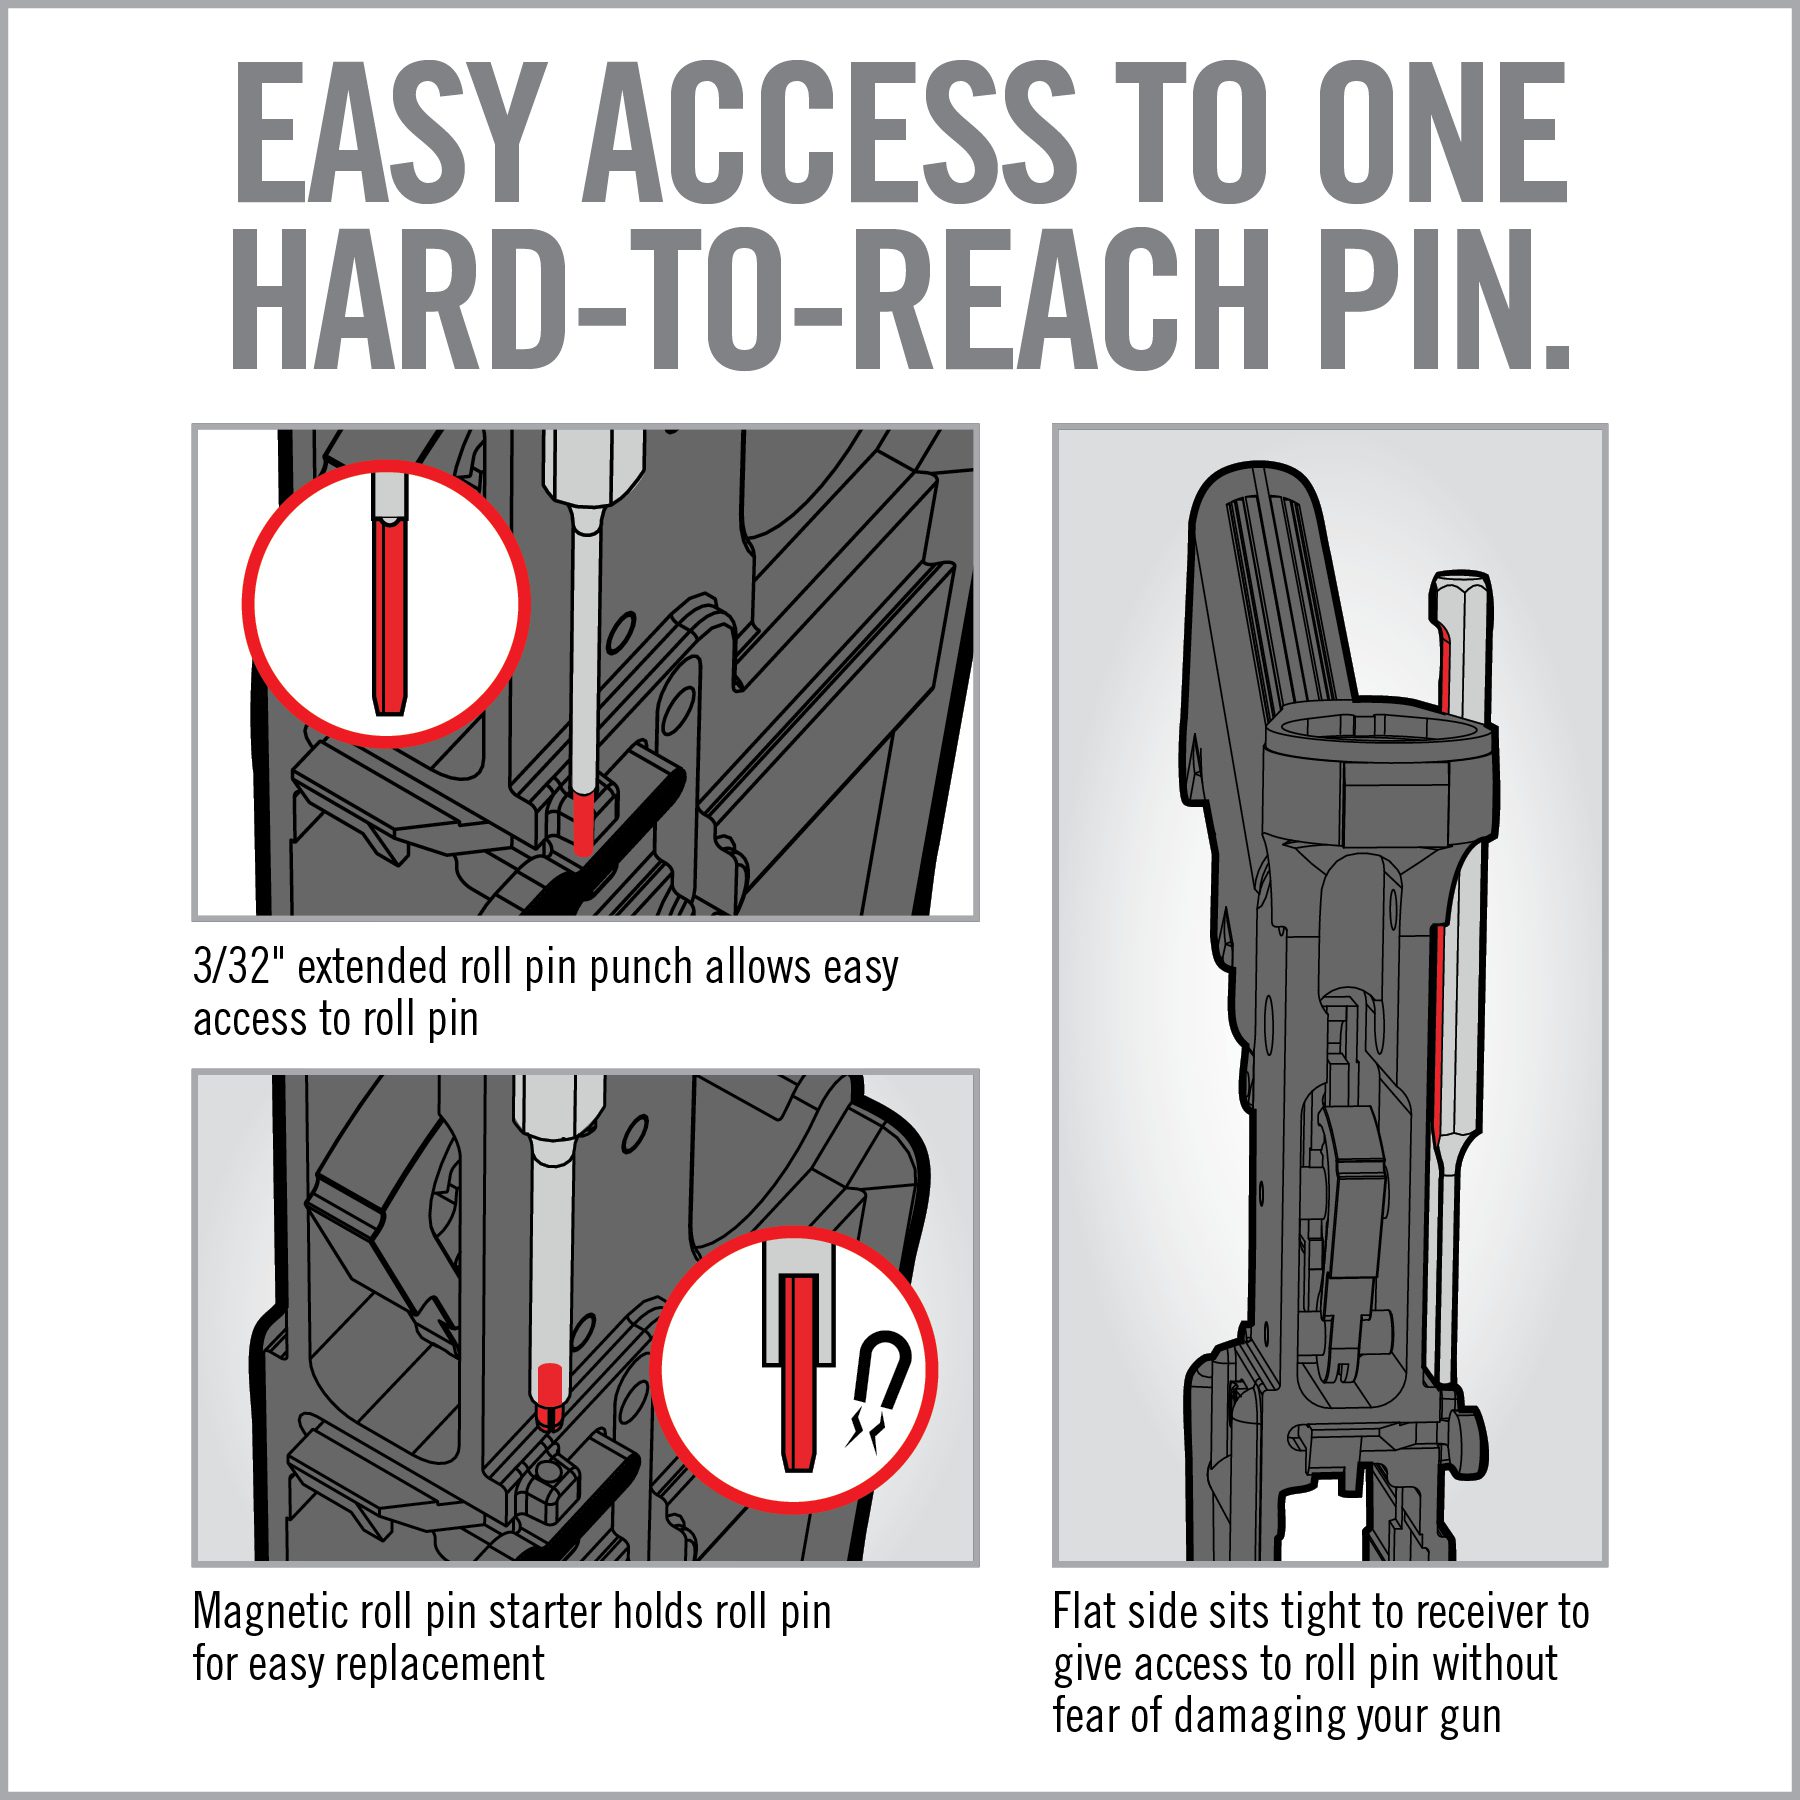 instructions for how to attach a hard - to - reach pin